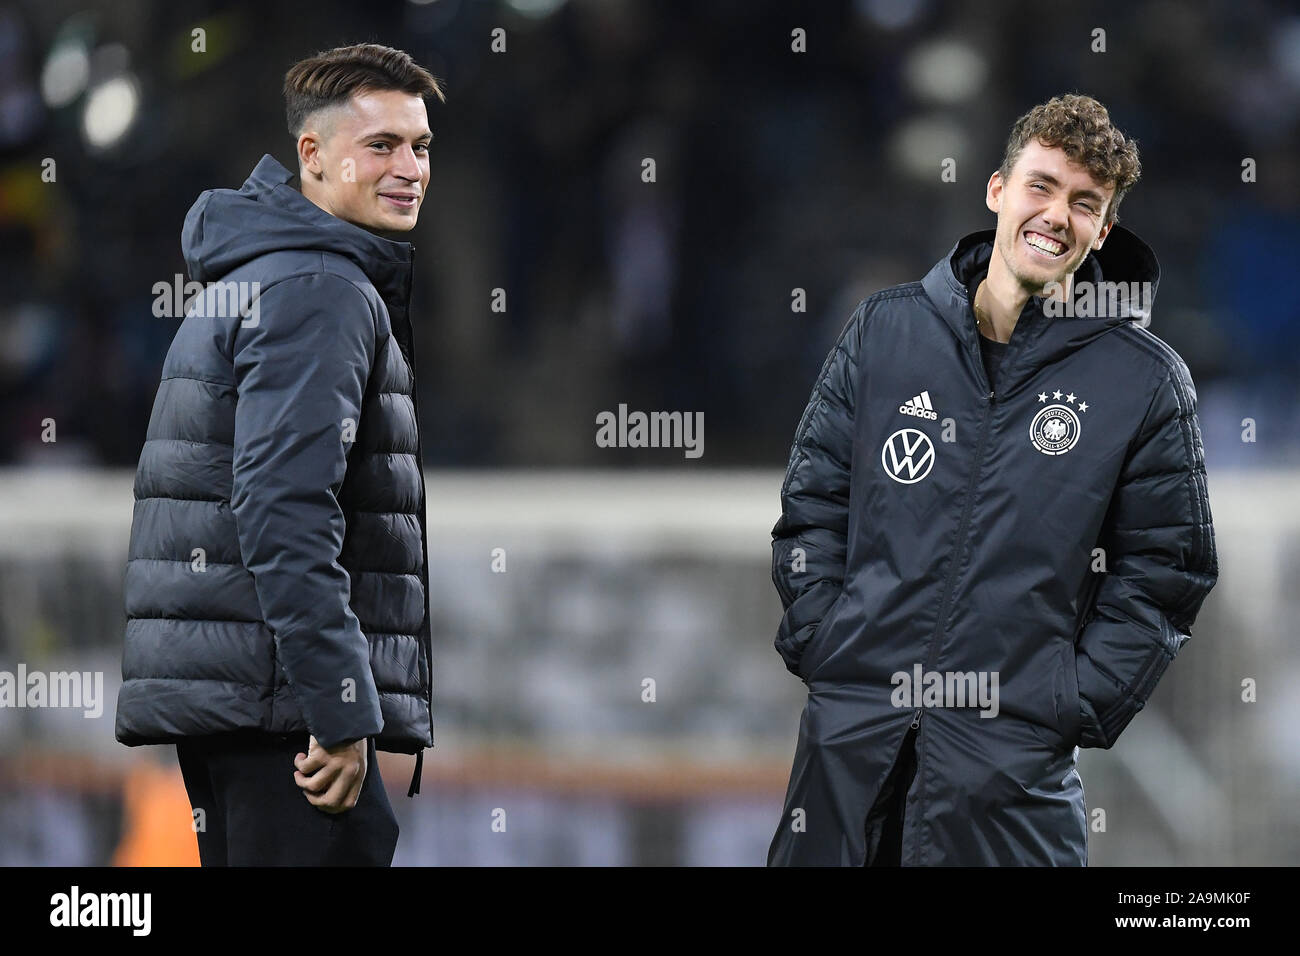 Robin Koch (Germany) and Luca Waldschmidt (Germany) laughs before the game  on the pitch. GES/Soccer/EURO Qualification: Germany - Belarus, 16.11.2019  Football/Soccer: European Qualifiers: Germany vs Belarus, Borussia  Monchengladbach, November 16, 2019